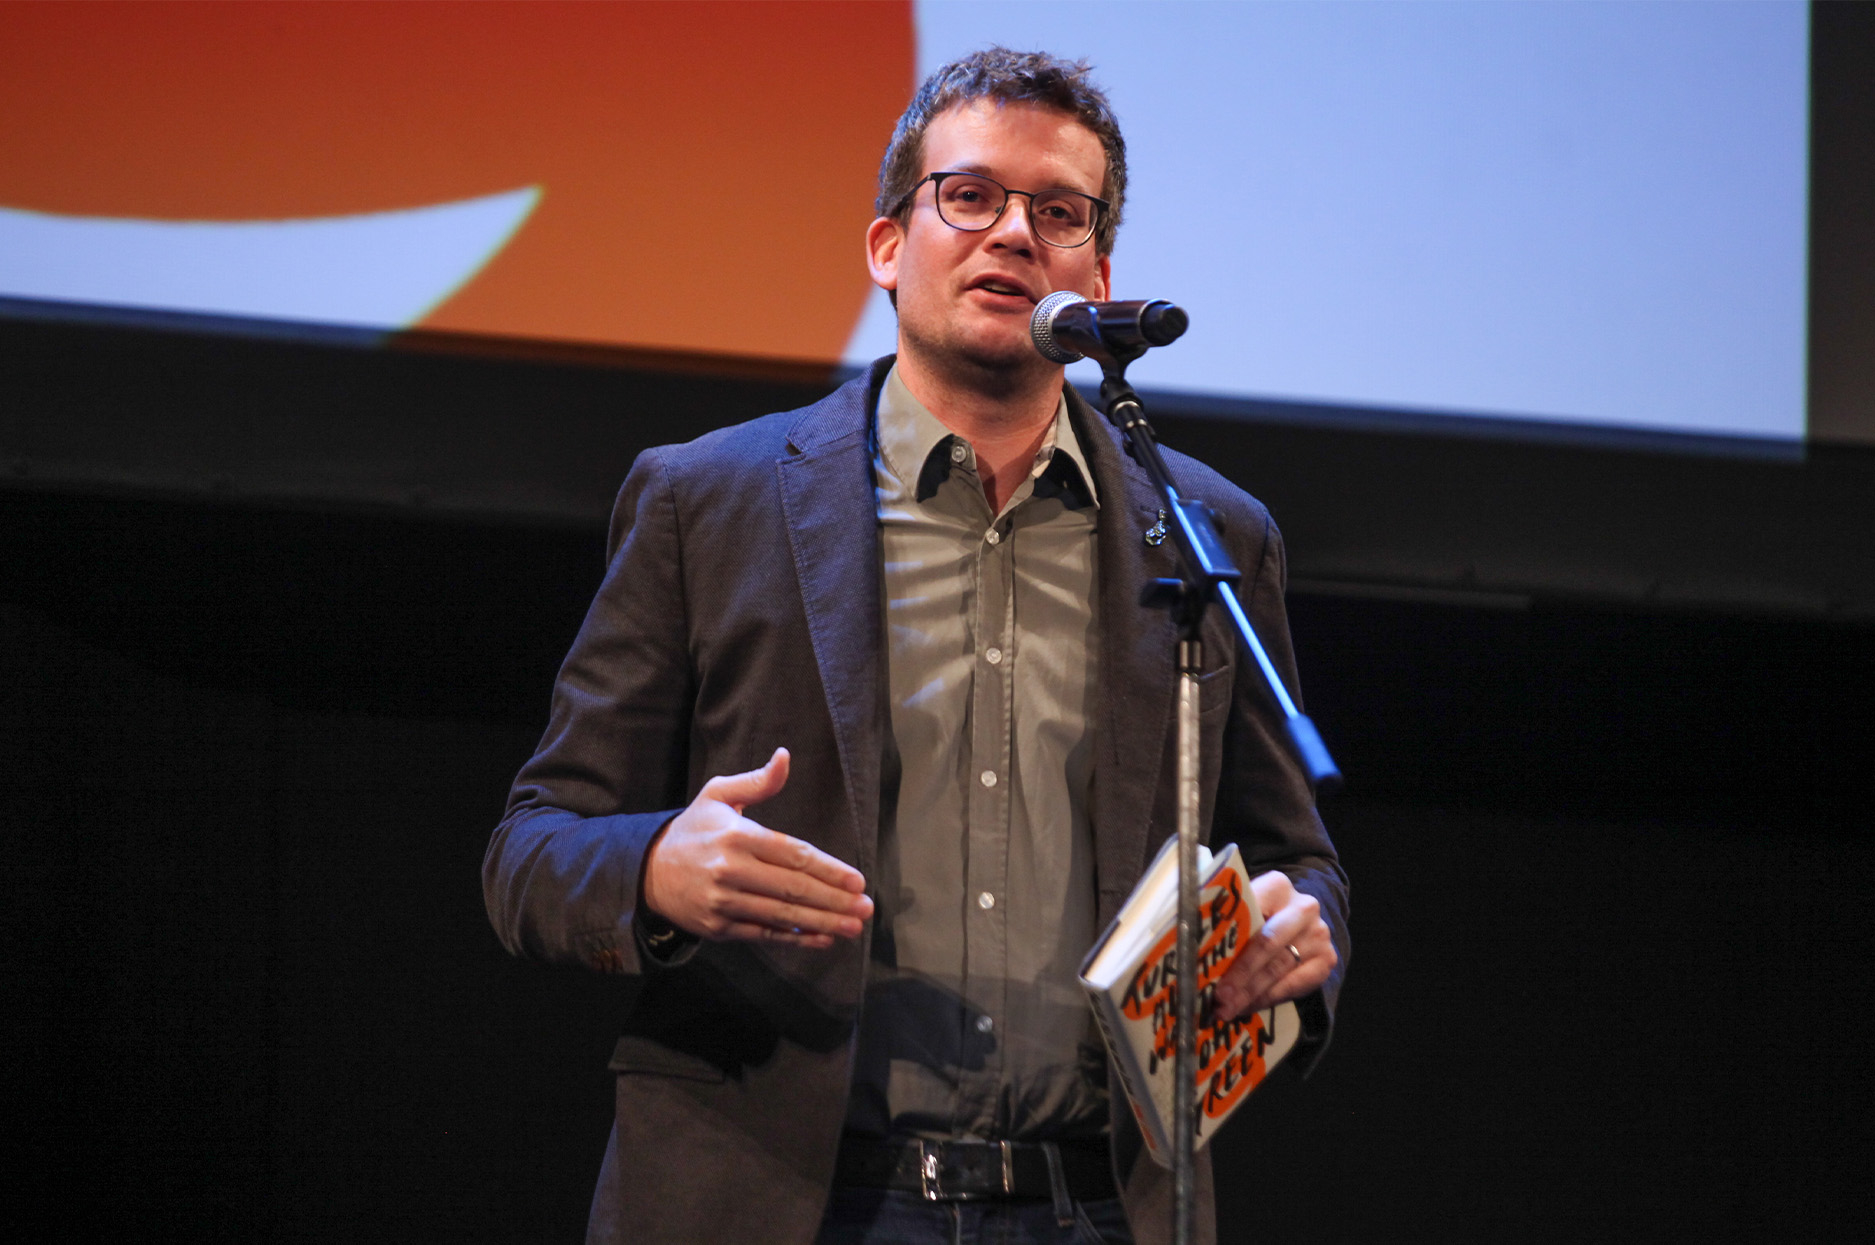 John Green in a blazer and glasses speaking at a microphone with a book in hand